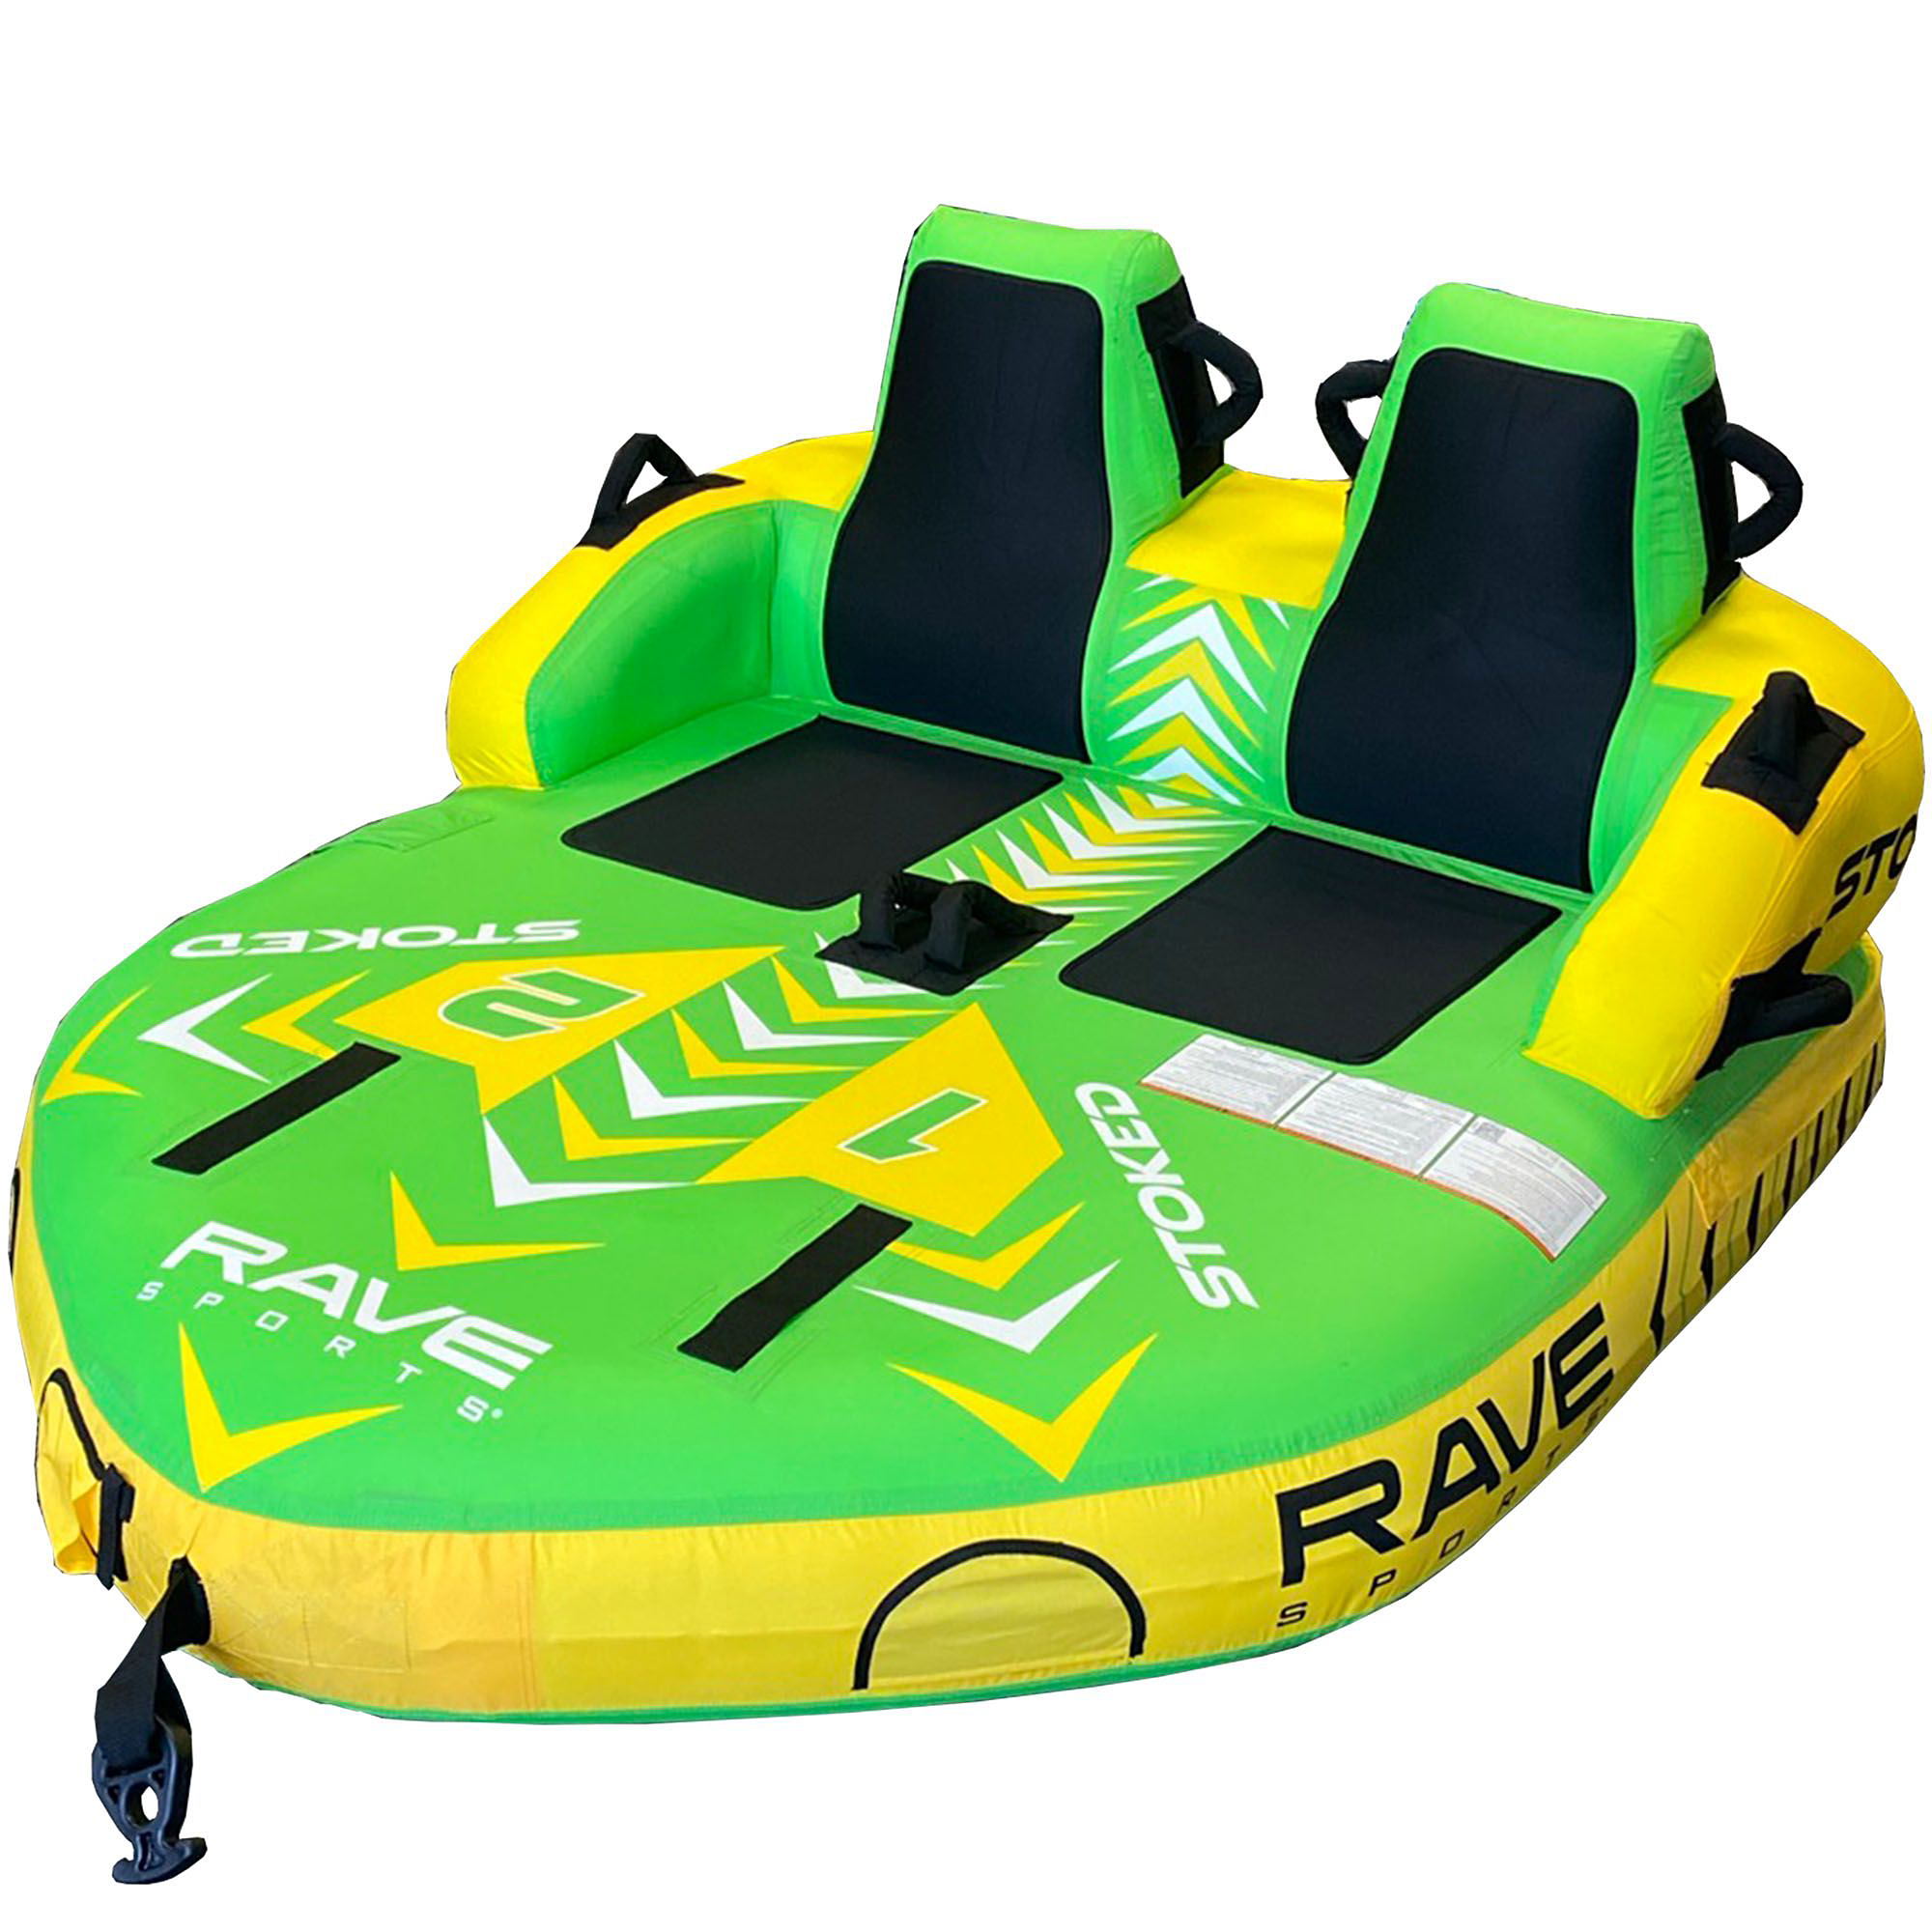 RAVE Sports Big Easy Inflatable Towable